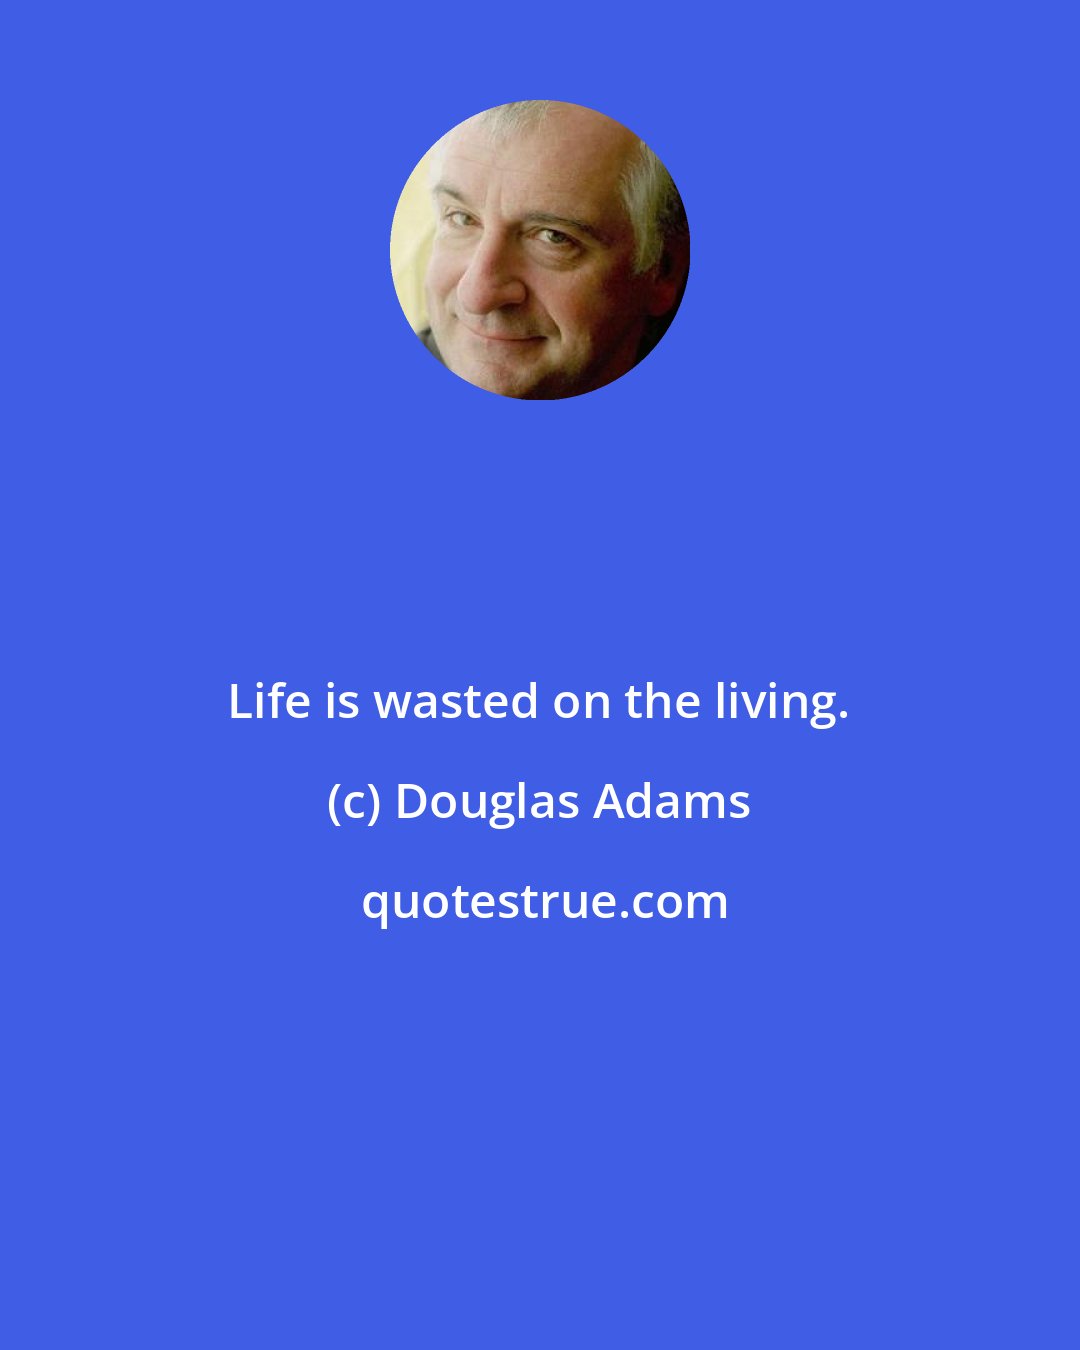 Douglas Adams: Life is wasted on the living.